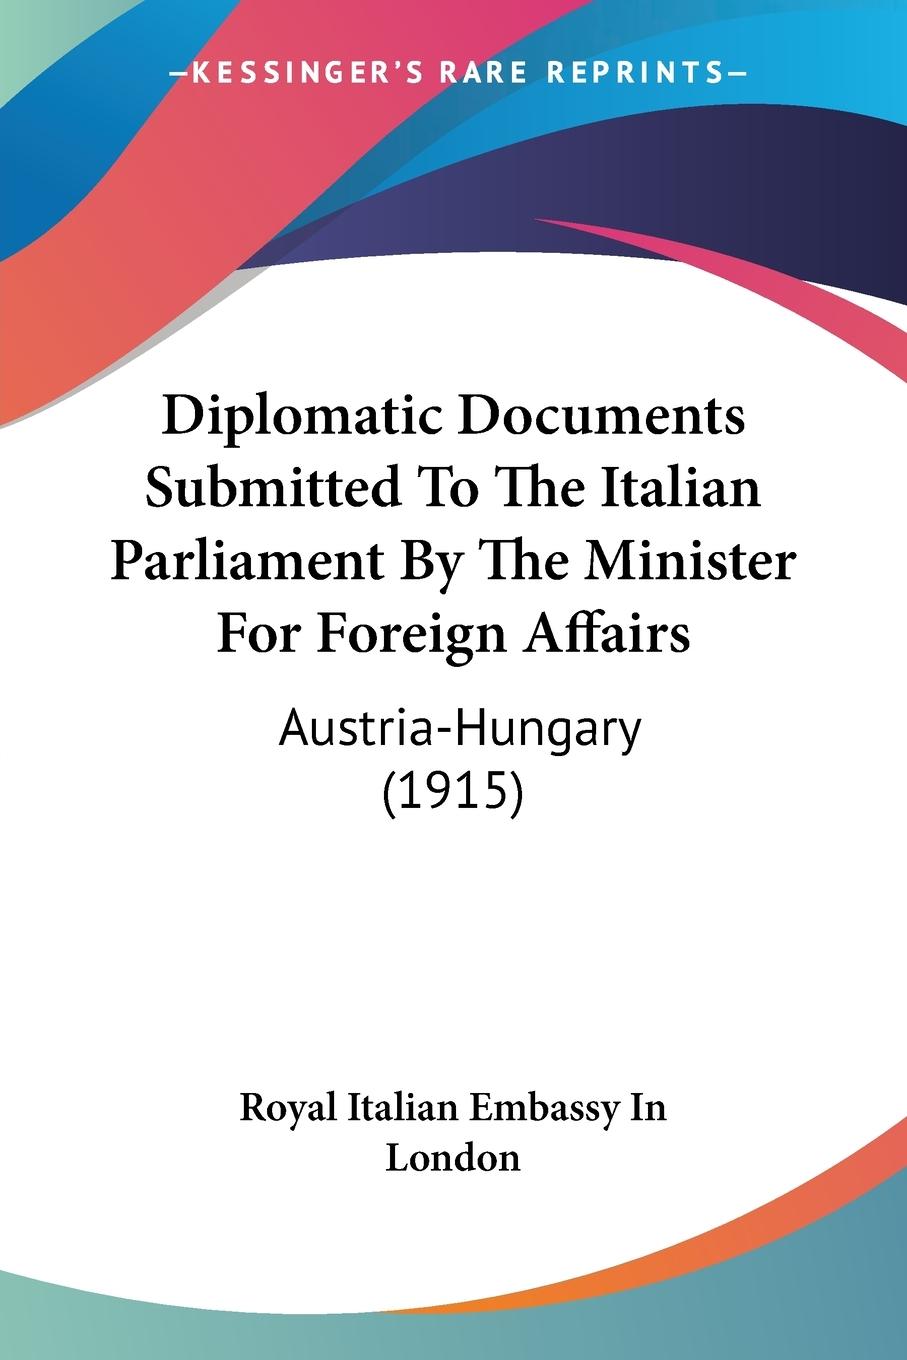 Diplomatic Documents Submitted To The Italian Parliament By The Minister For Foreign Affairs - Royal Italian Embassy In London